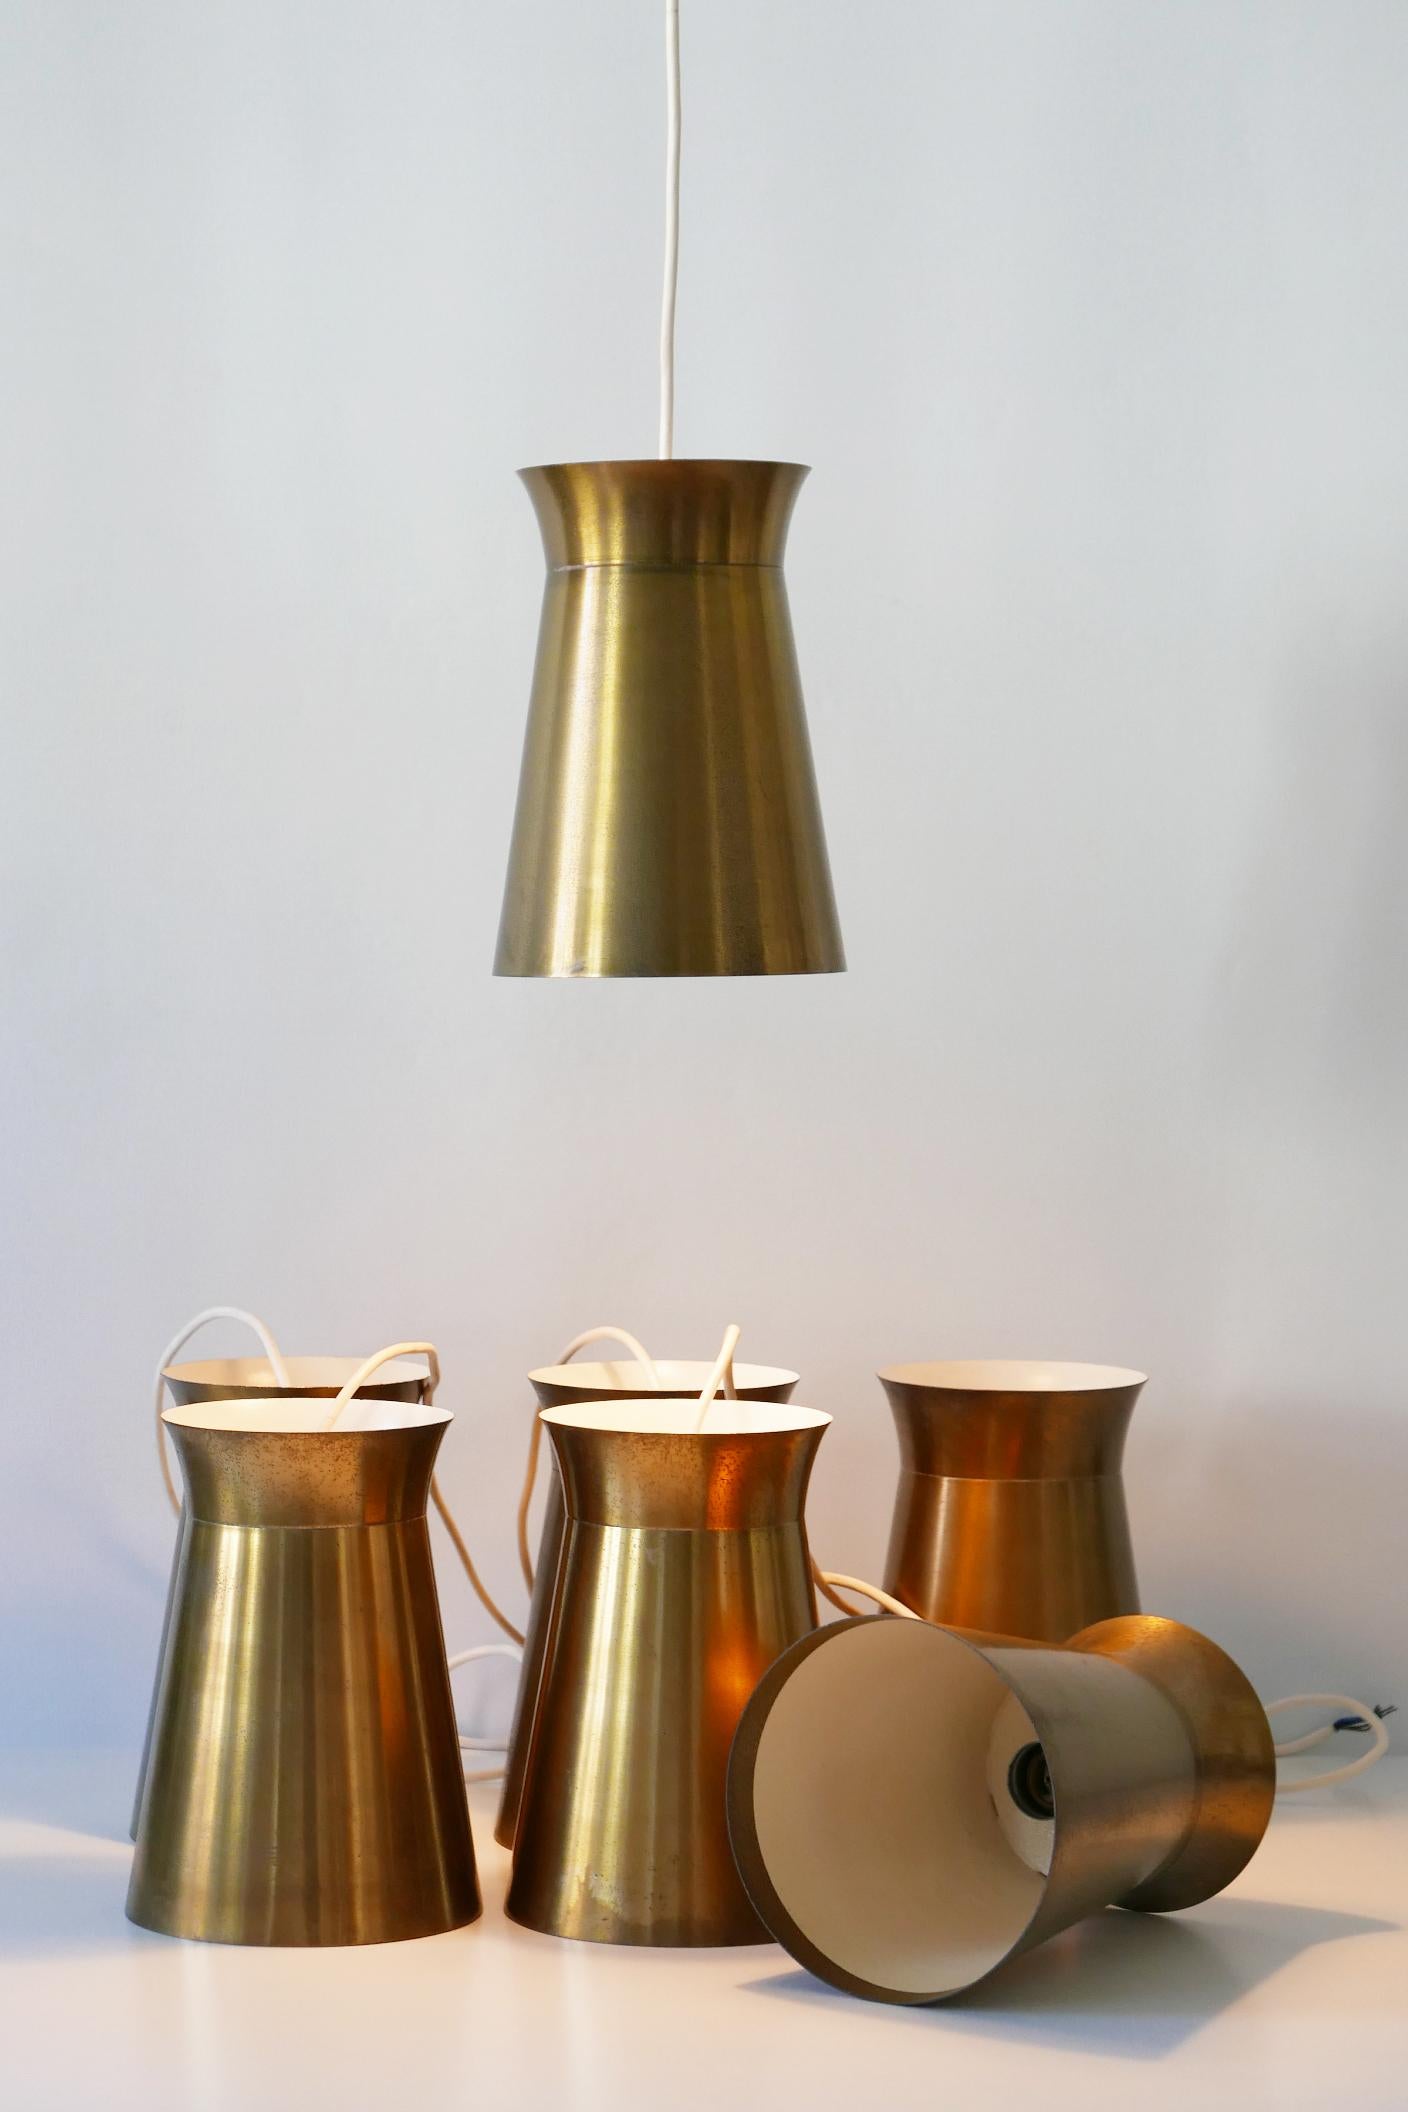 Elegant Mid-Century Modern Brass Pendant Lamps or Hanging Lights, 1950s, Germany For Sale 7